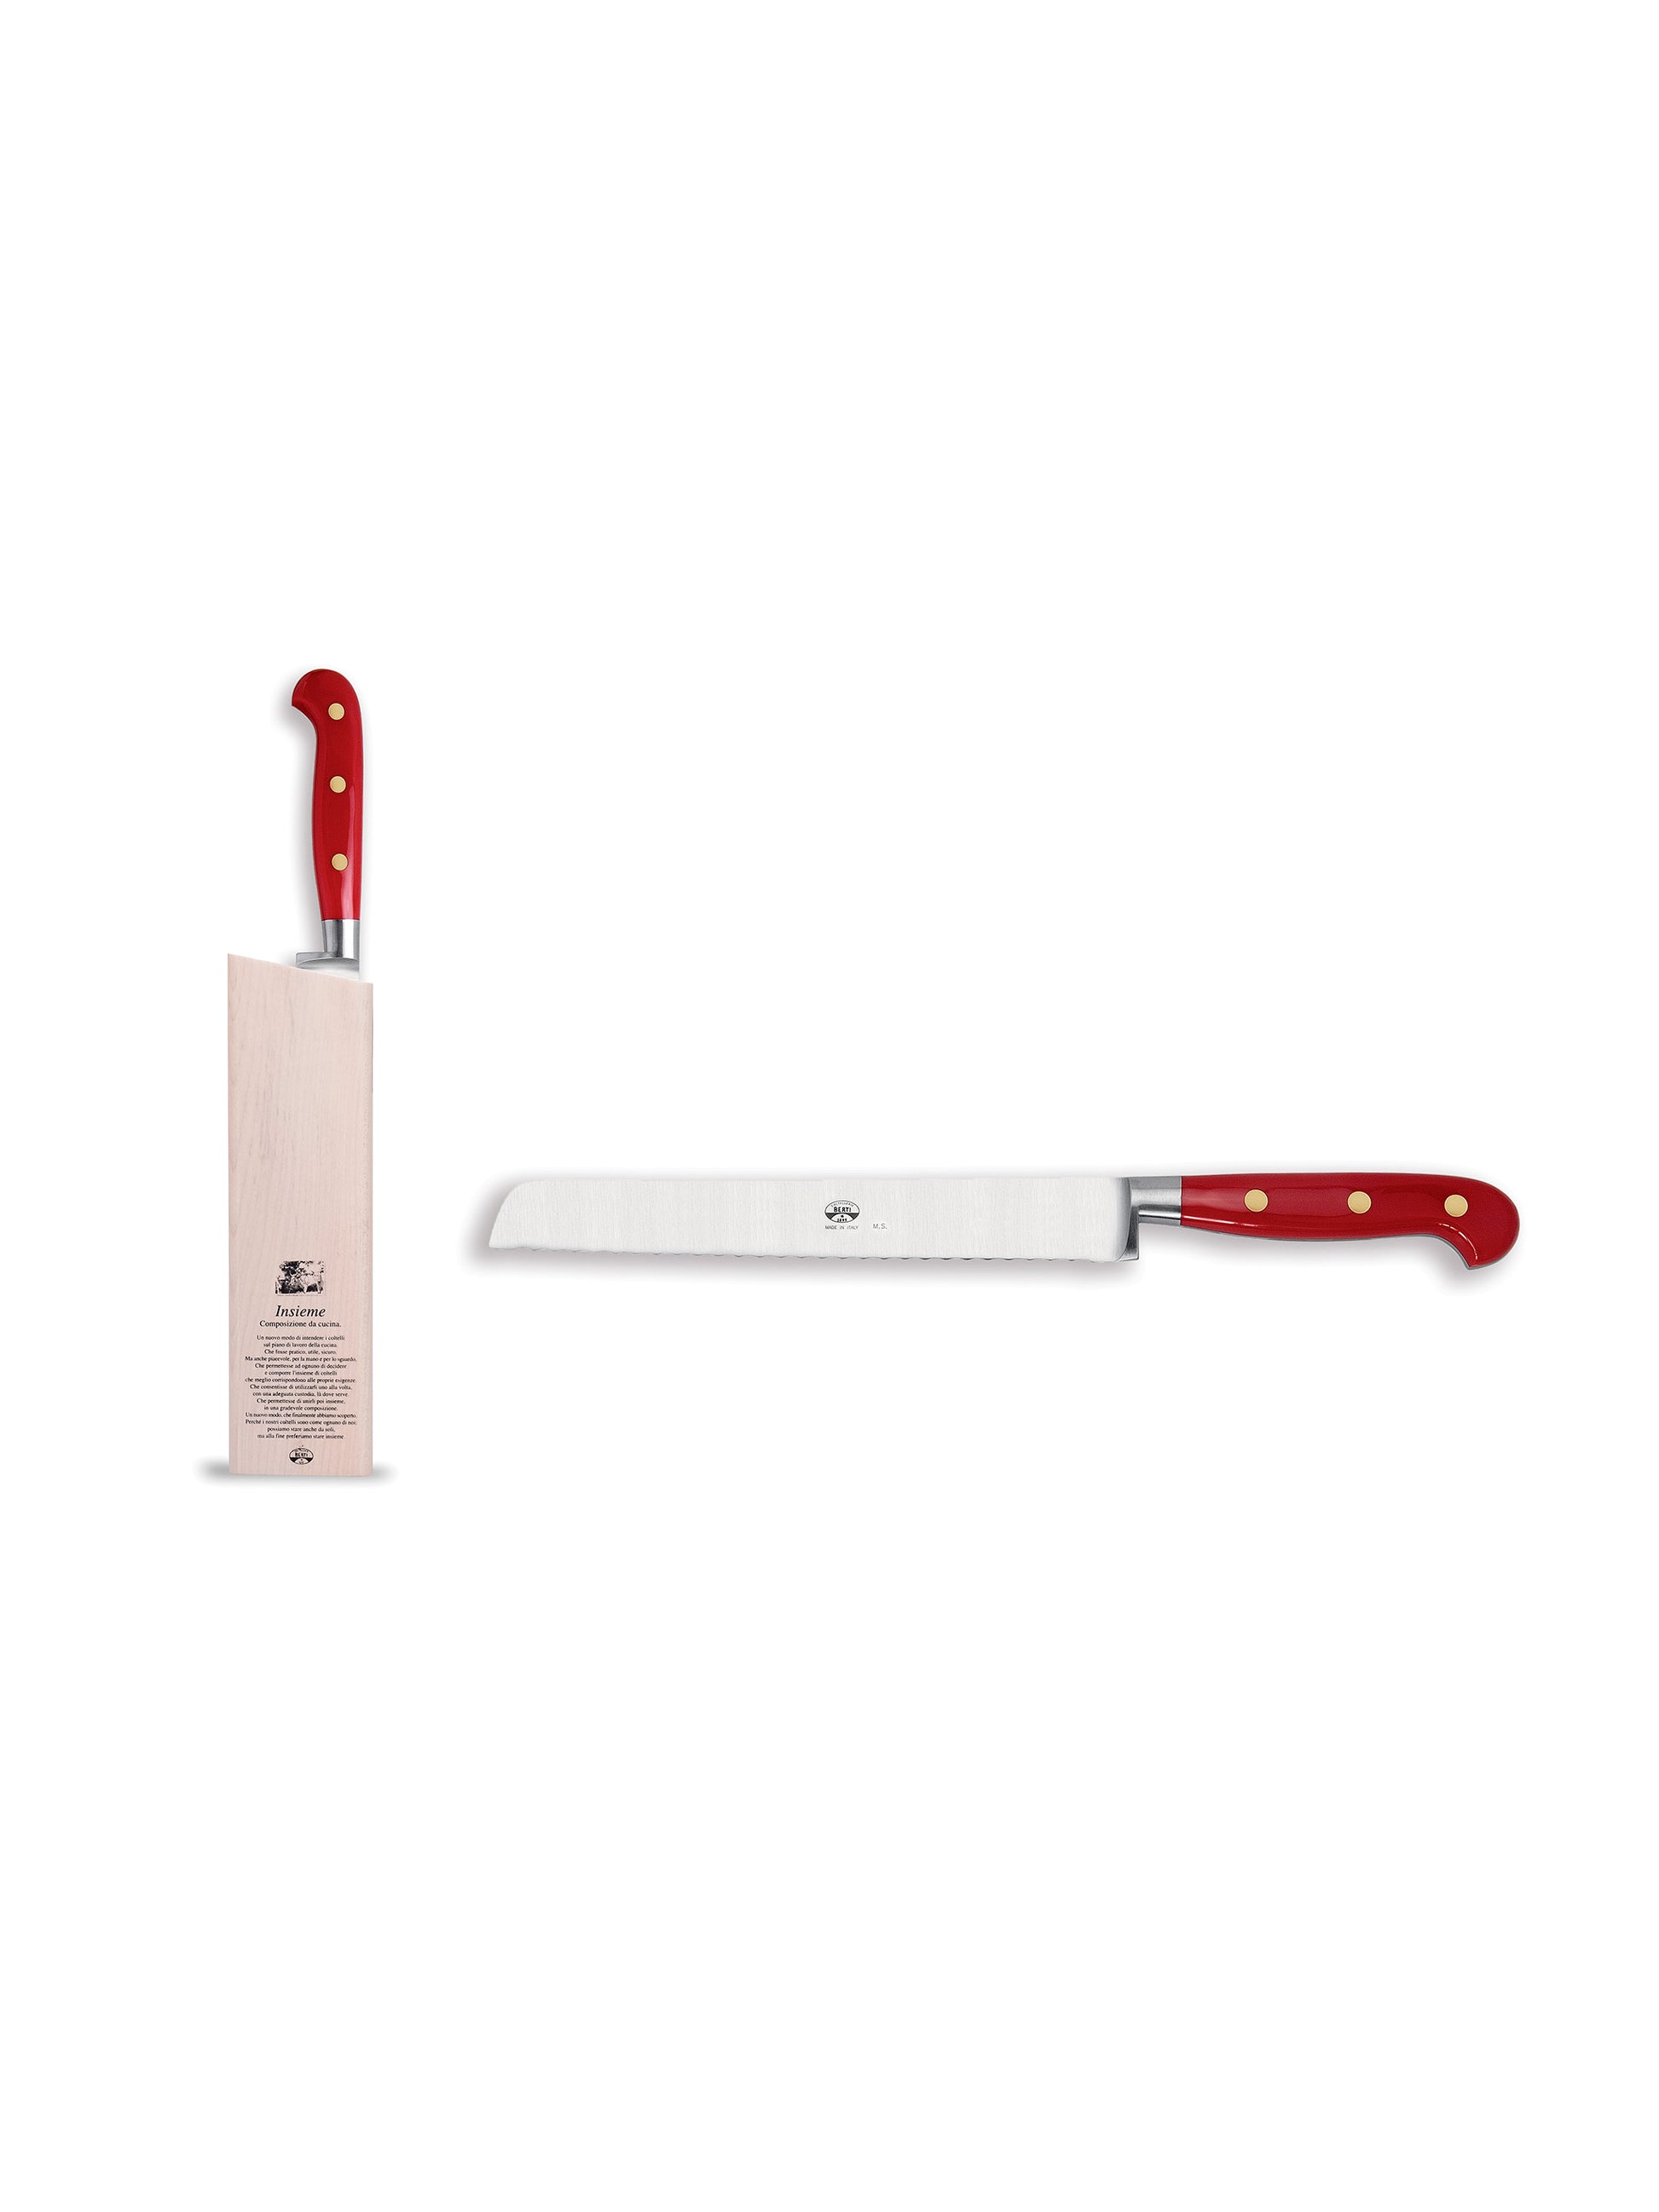 Coltellerie Berti Cutlery Red Insieme Lucite Bread Knife  with Wood Block Weston Table